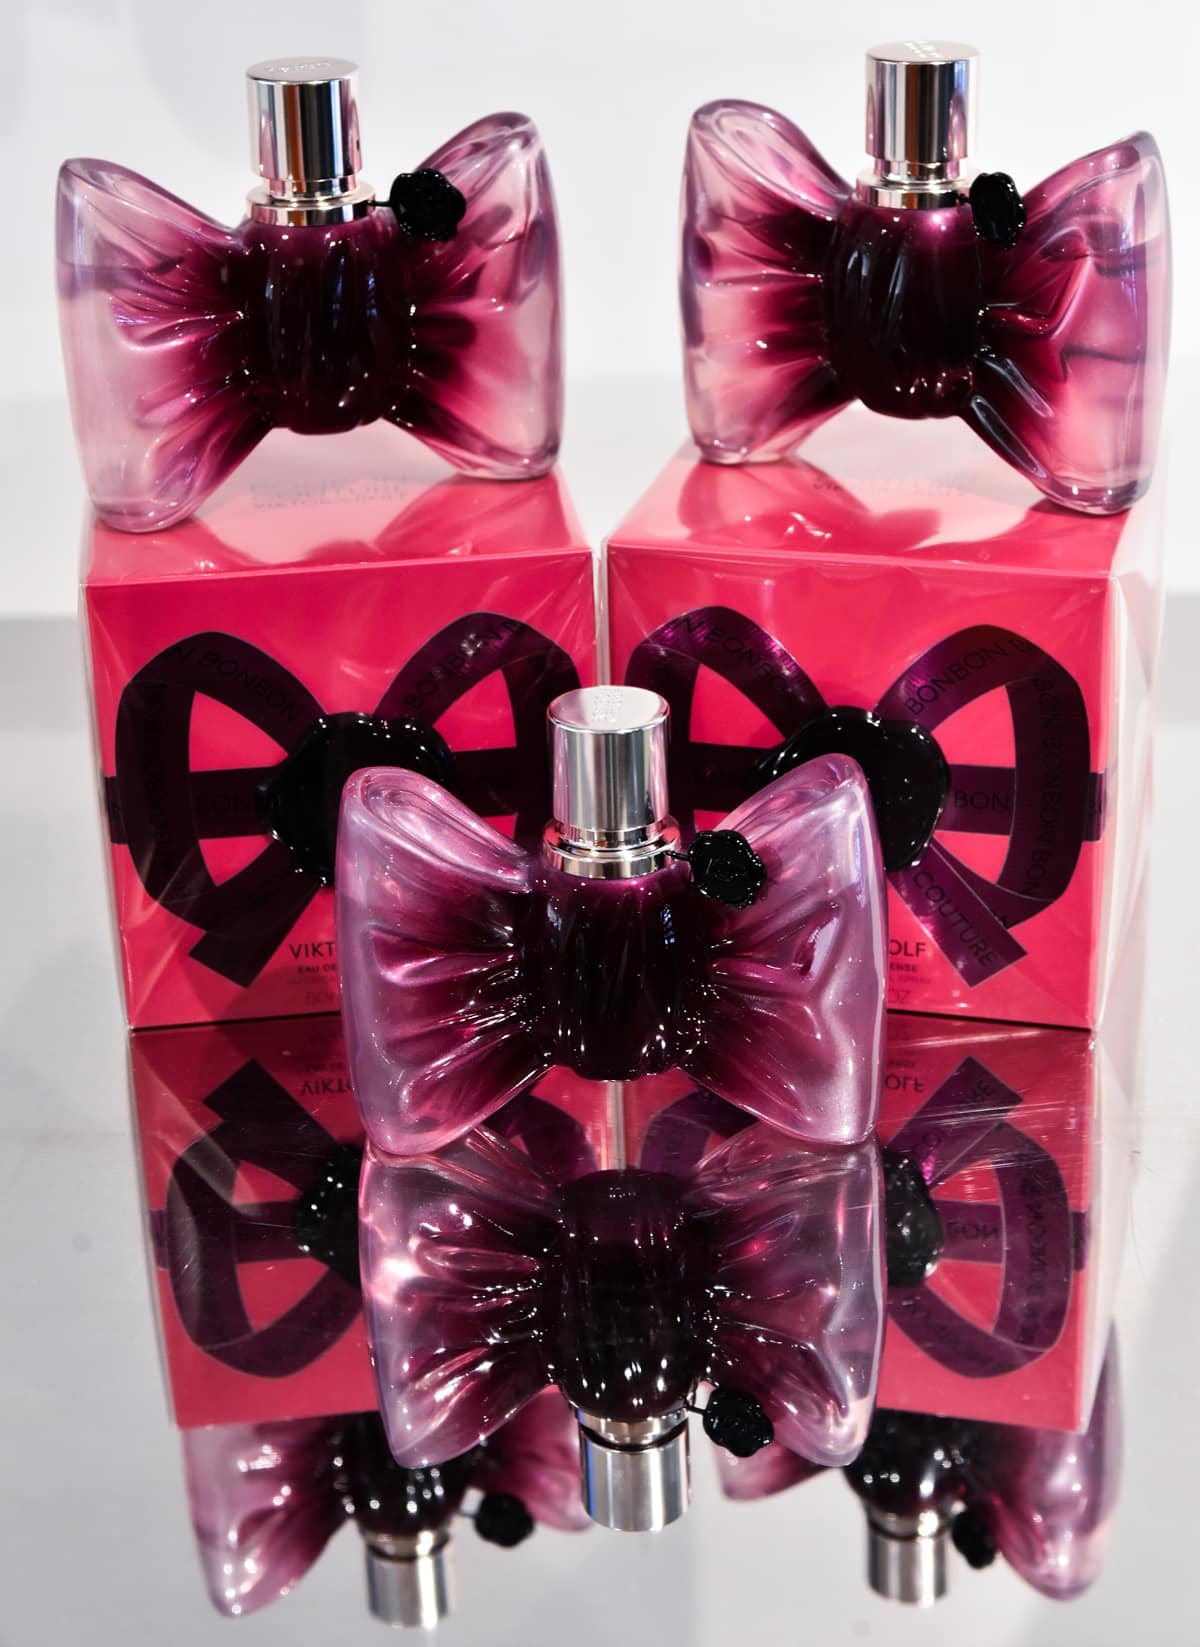 2014's Bonbon: A floral-fruity delight in Viktor & Rolf's women's collection